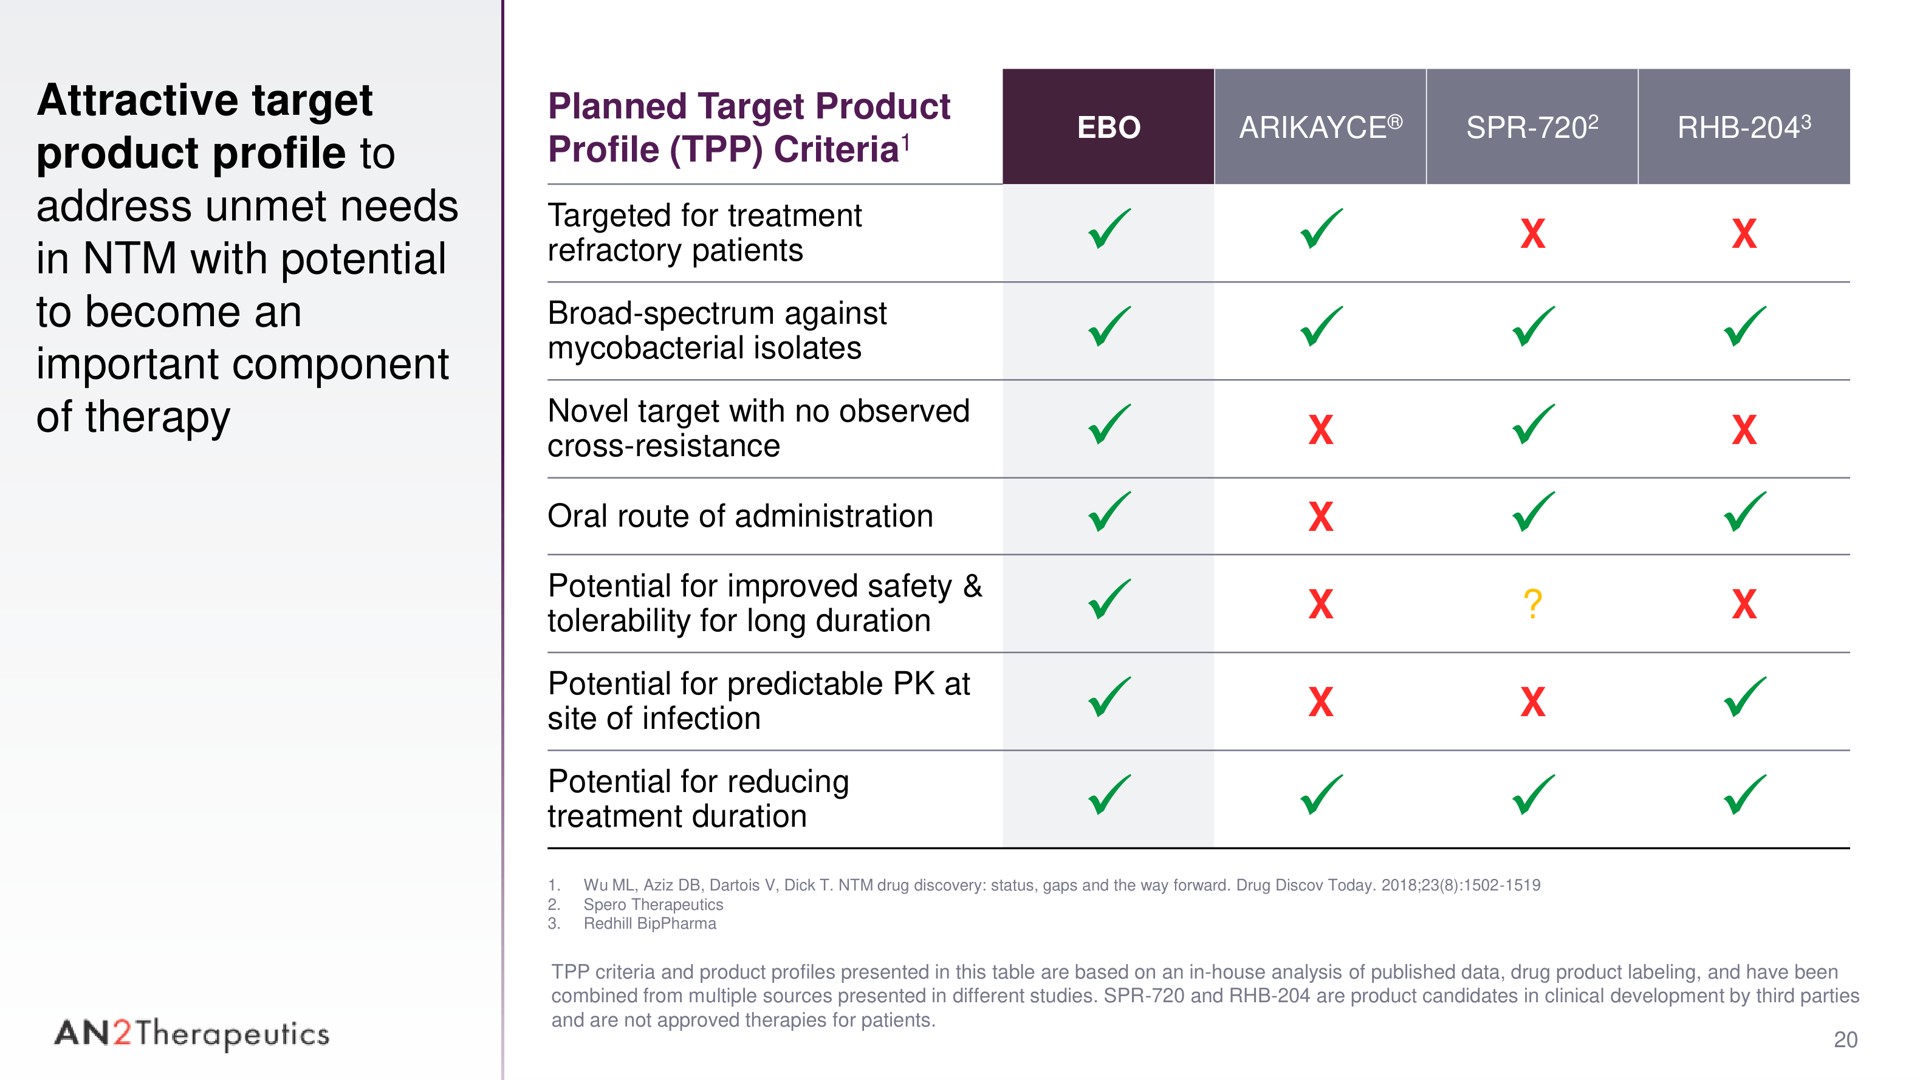 attractive target product profile to address unmet needs in with potential to become an important component of therapy planned target product profile criteria criteria i therapeutics | AN2 Therapeutics